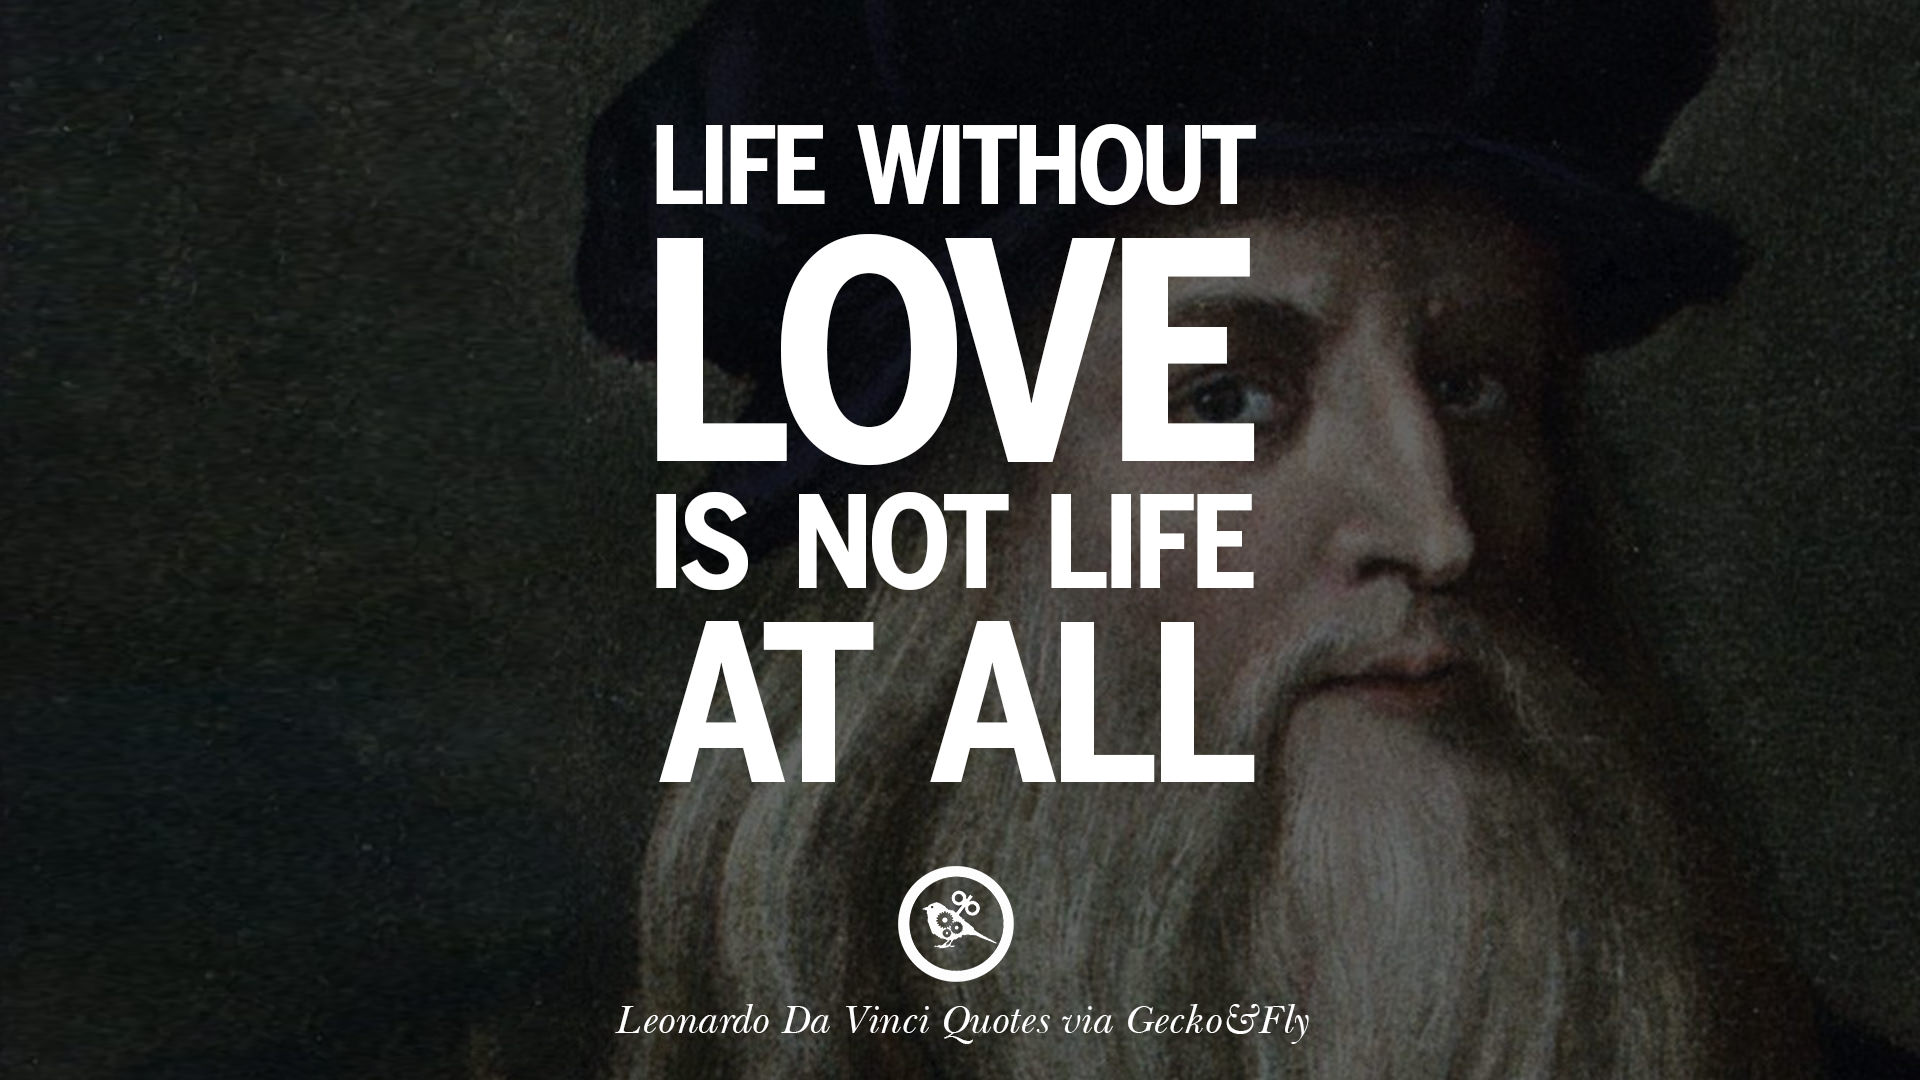 Life without love is not life at all Greatest Leonardo Da Vinci Quotes Love